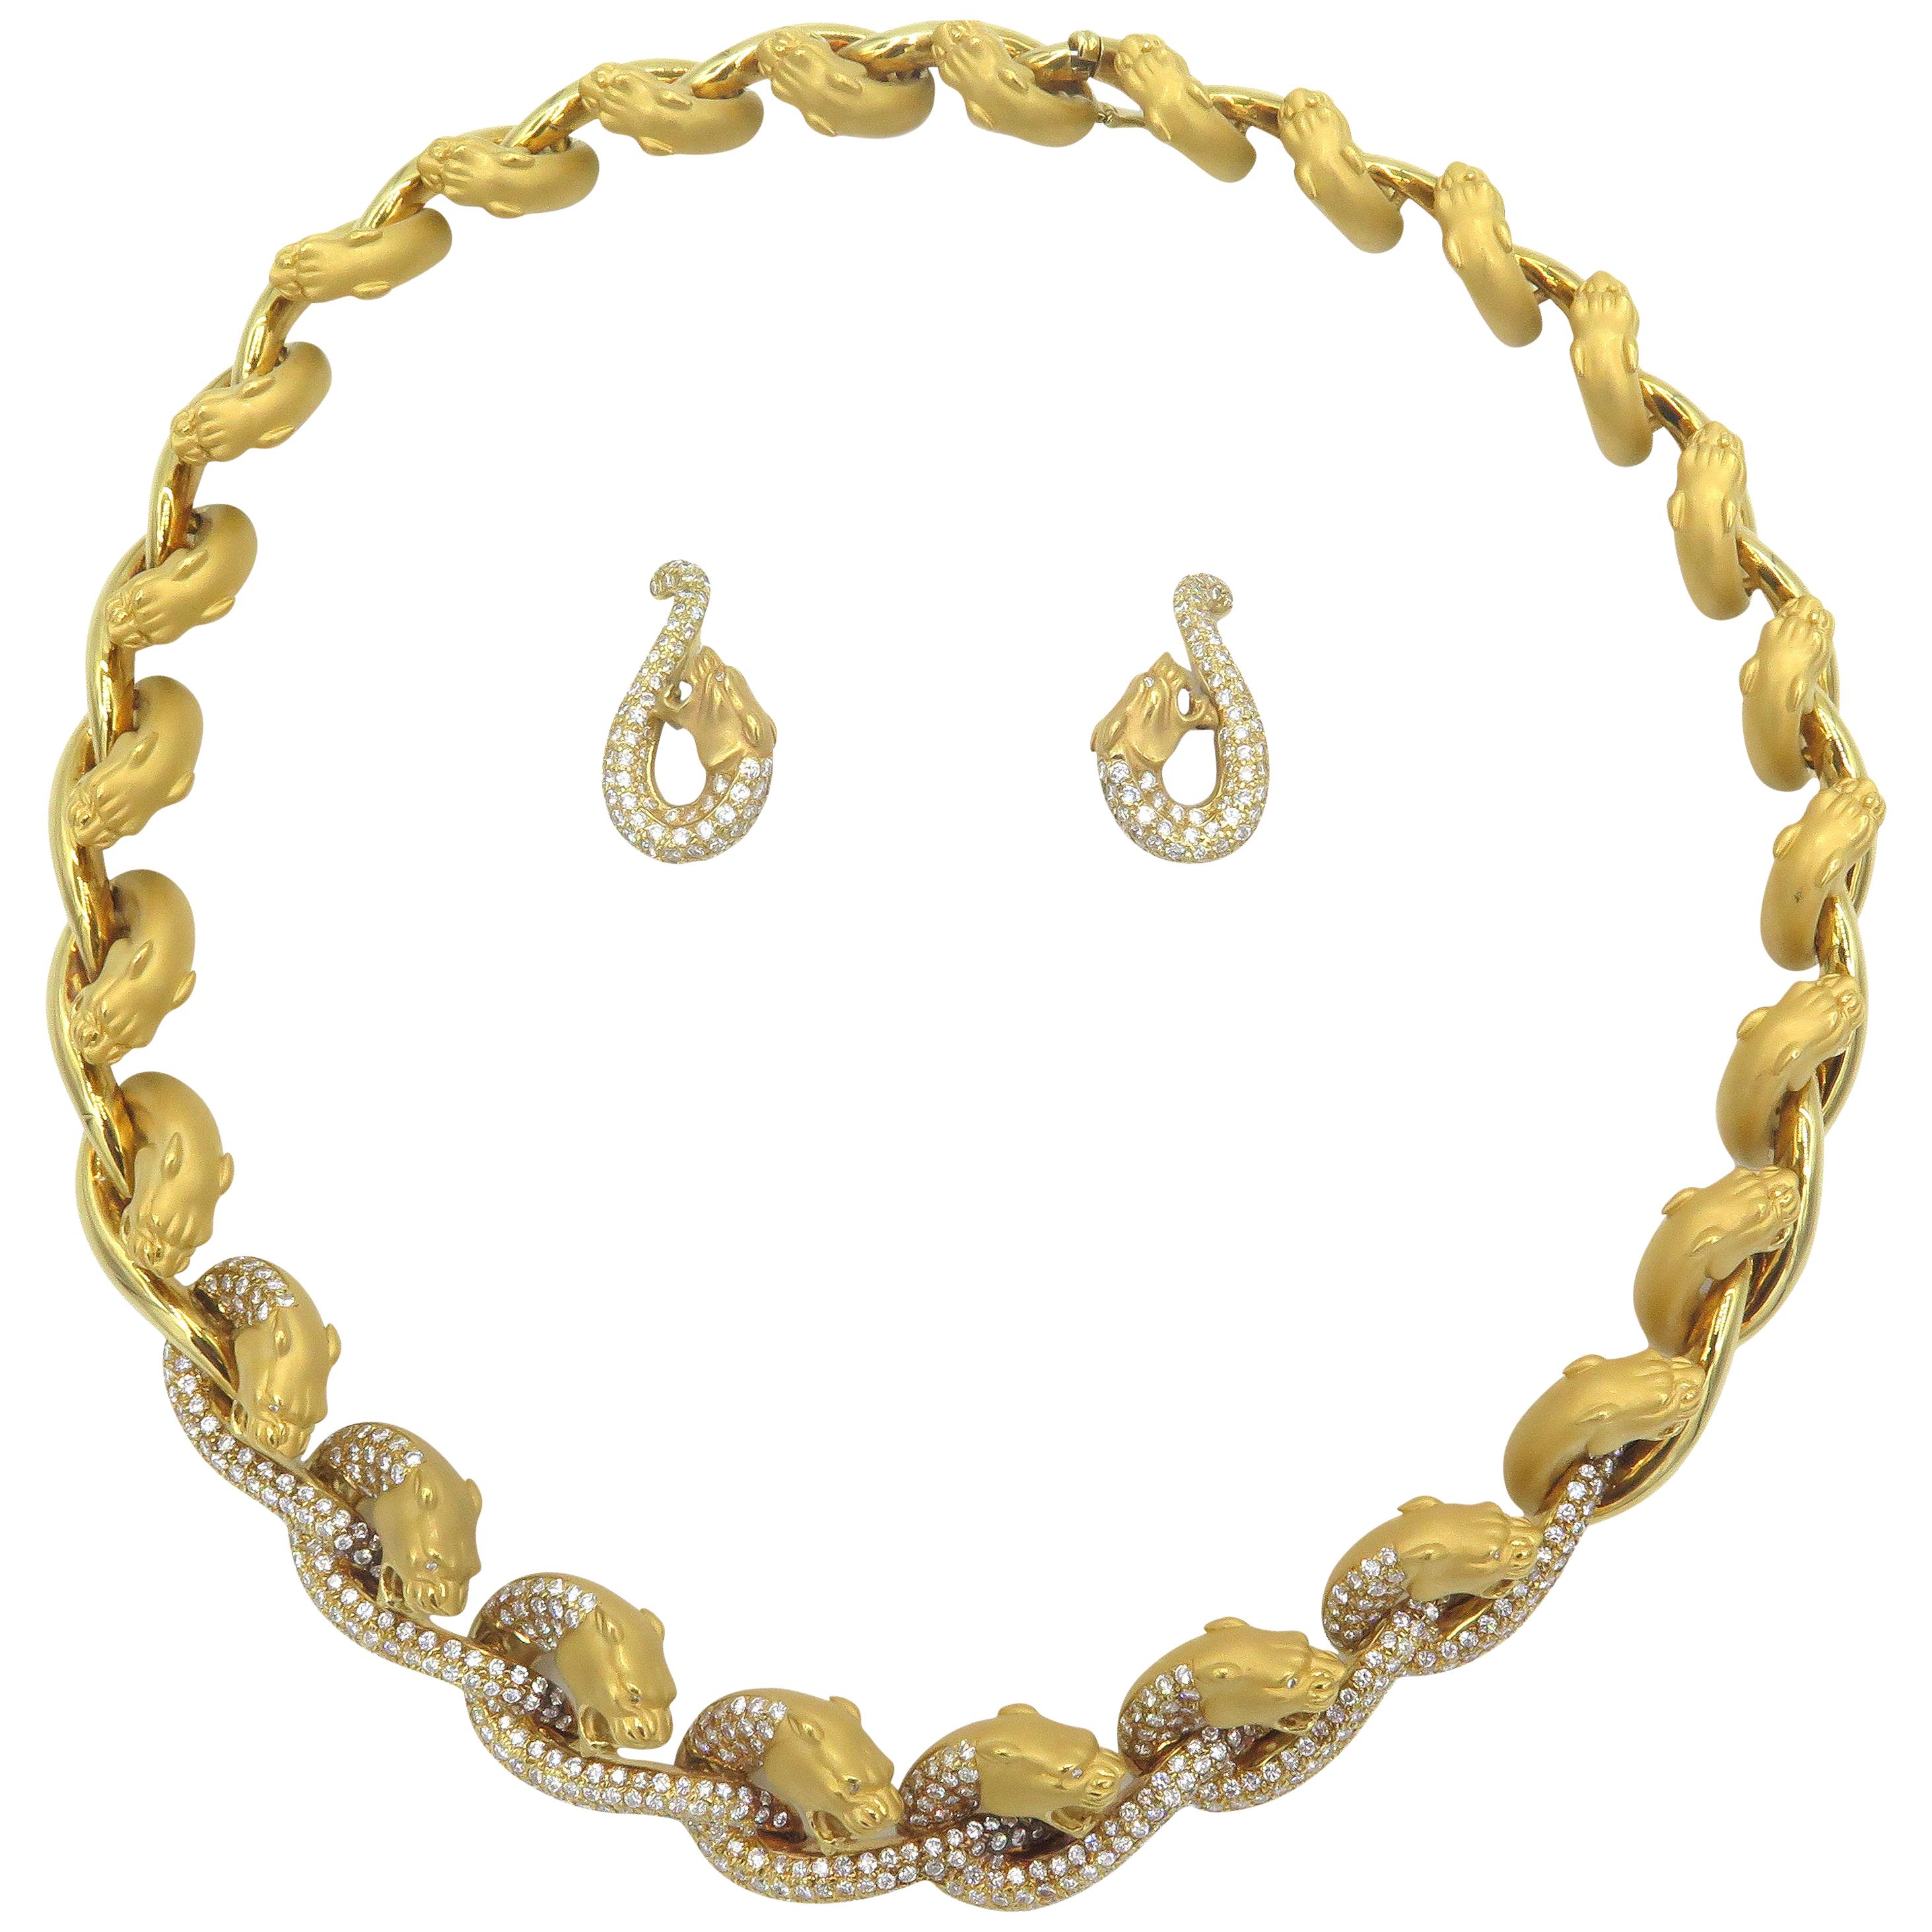 Carrera y Carrera 18 Karat Yellow Gold and Diamond Necklace and Earring Set For Sale